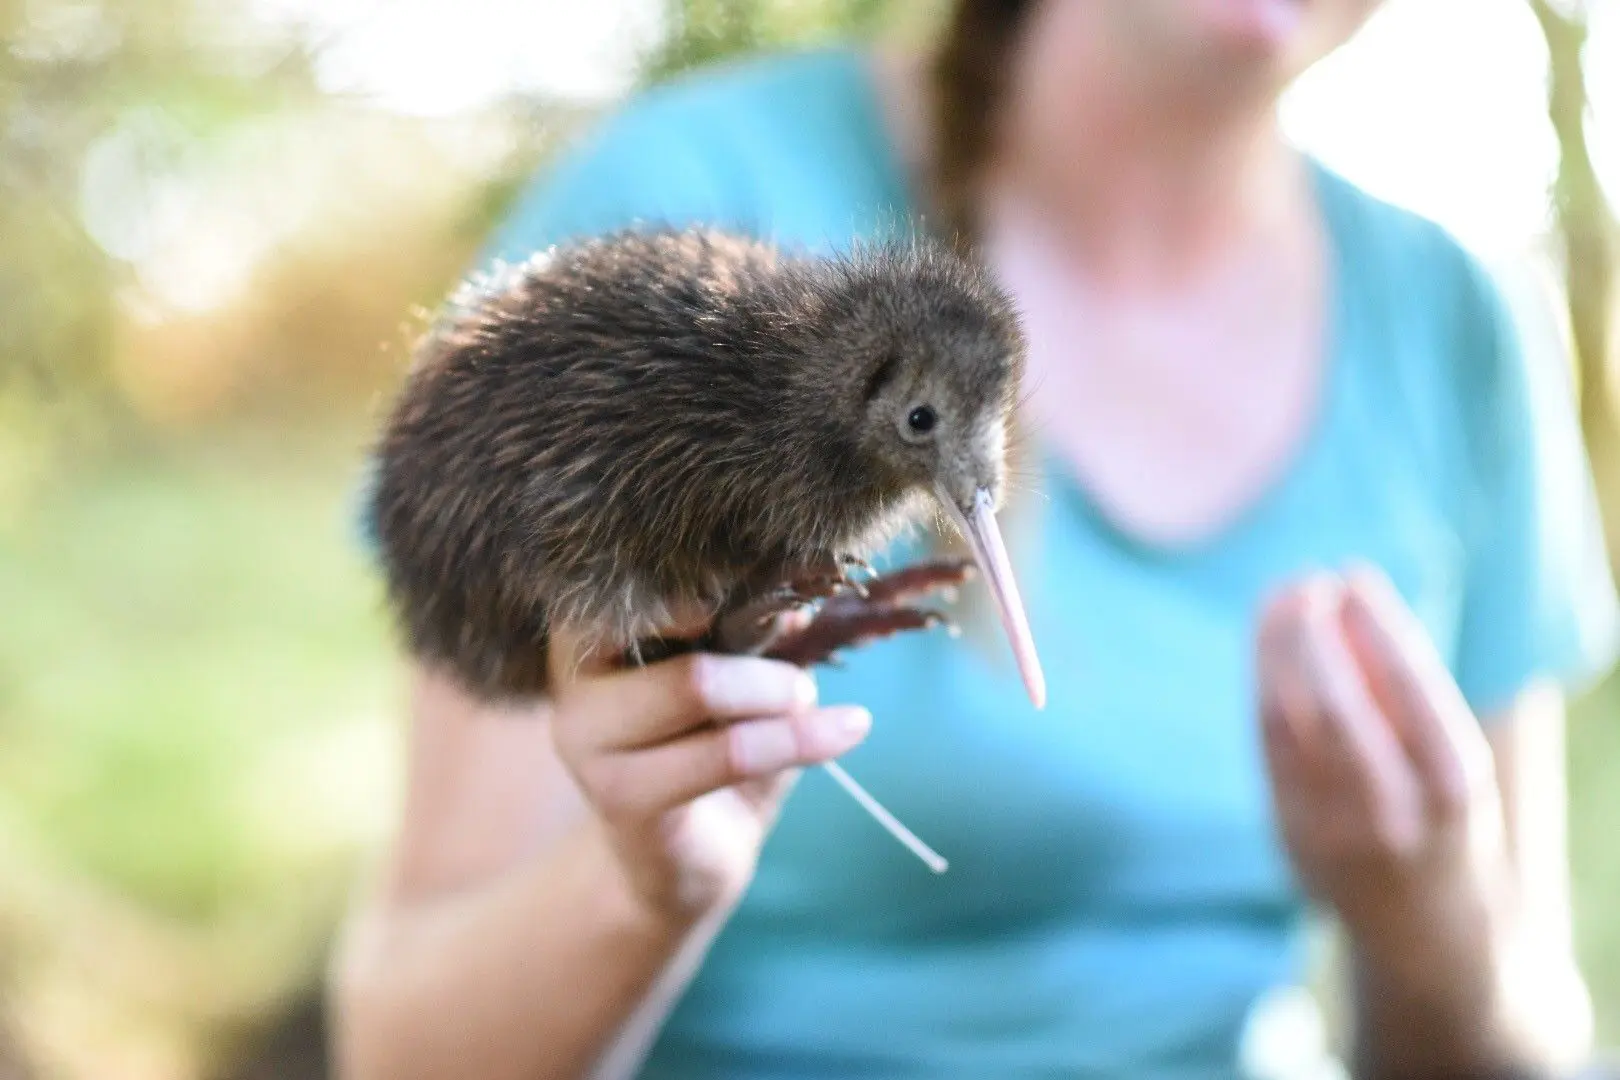 kiwi on the kiwi discovery walk, cape kidnappers on New Zealand holiday